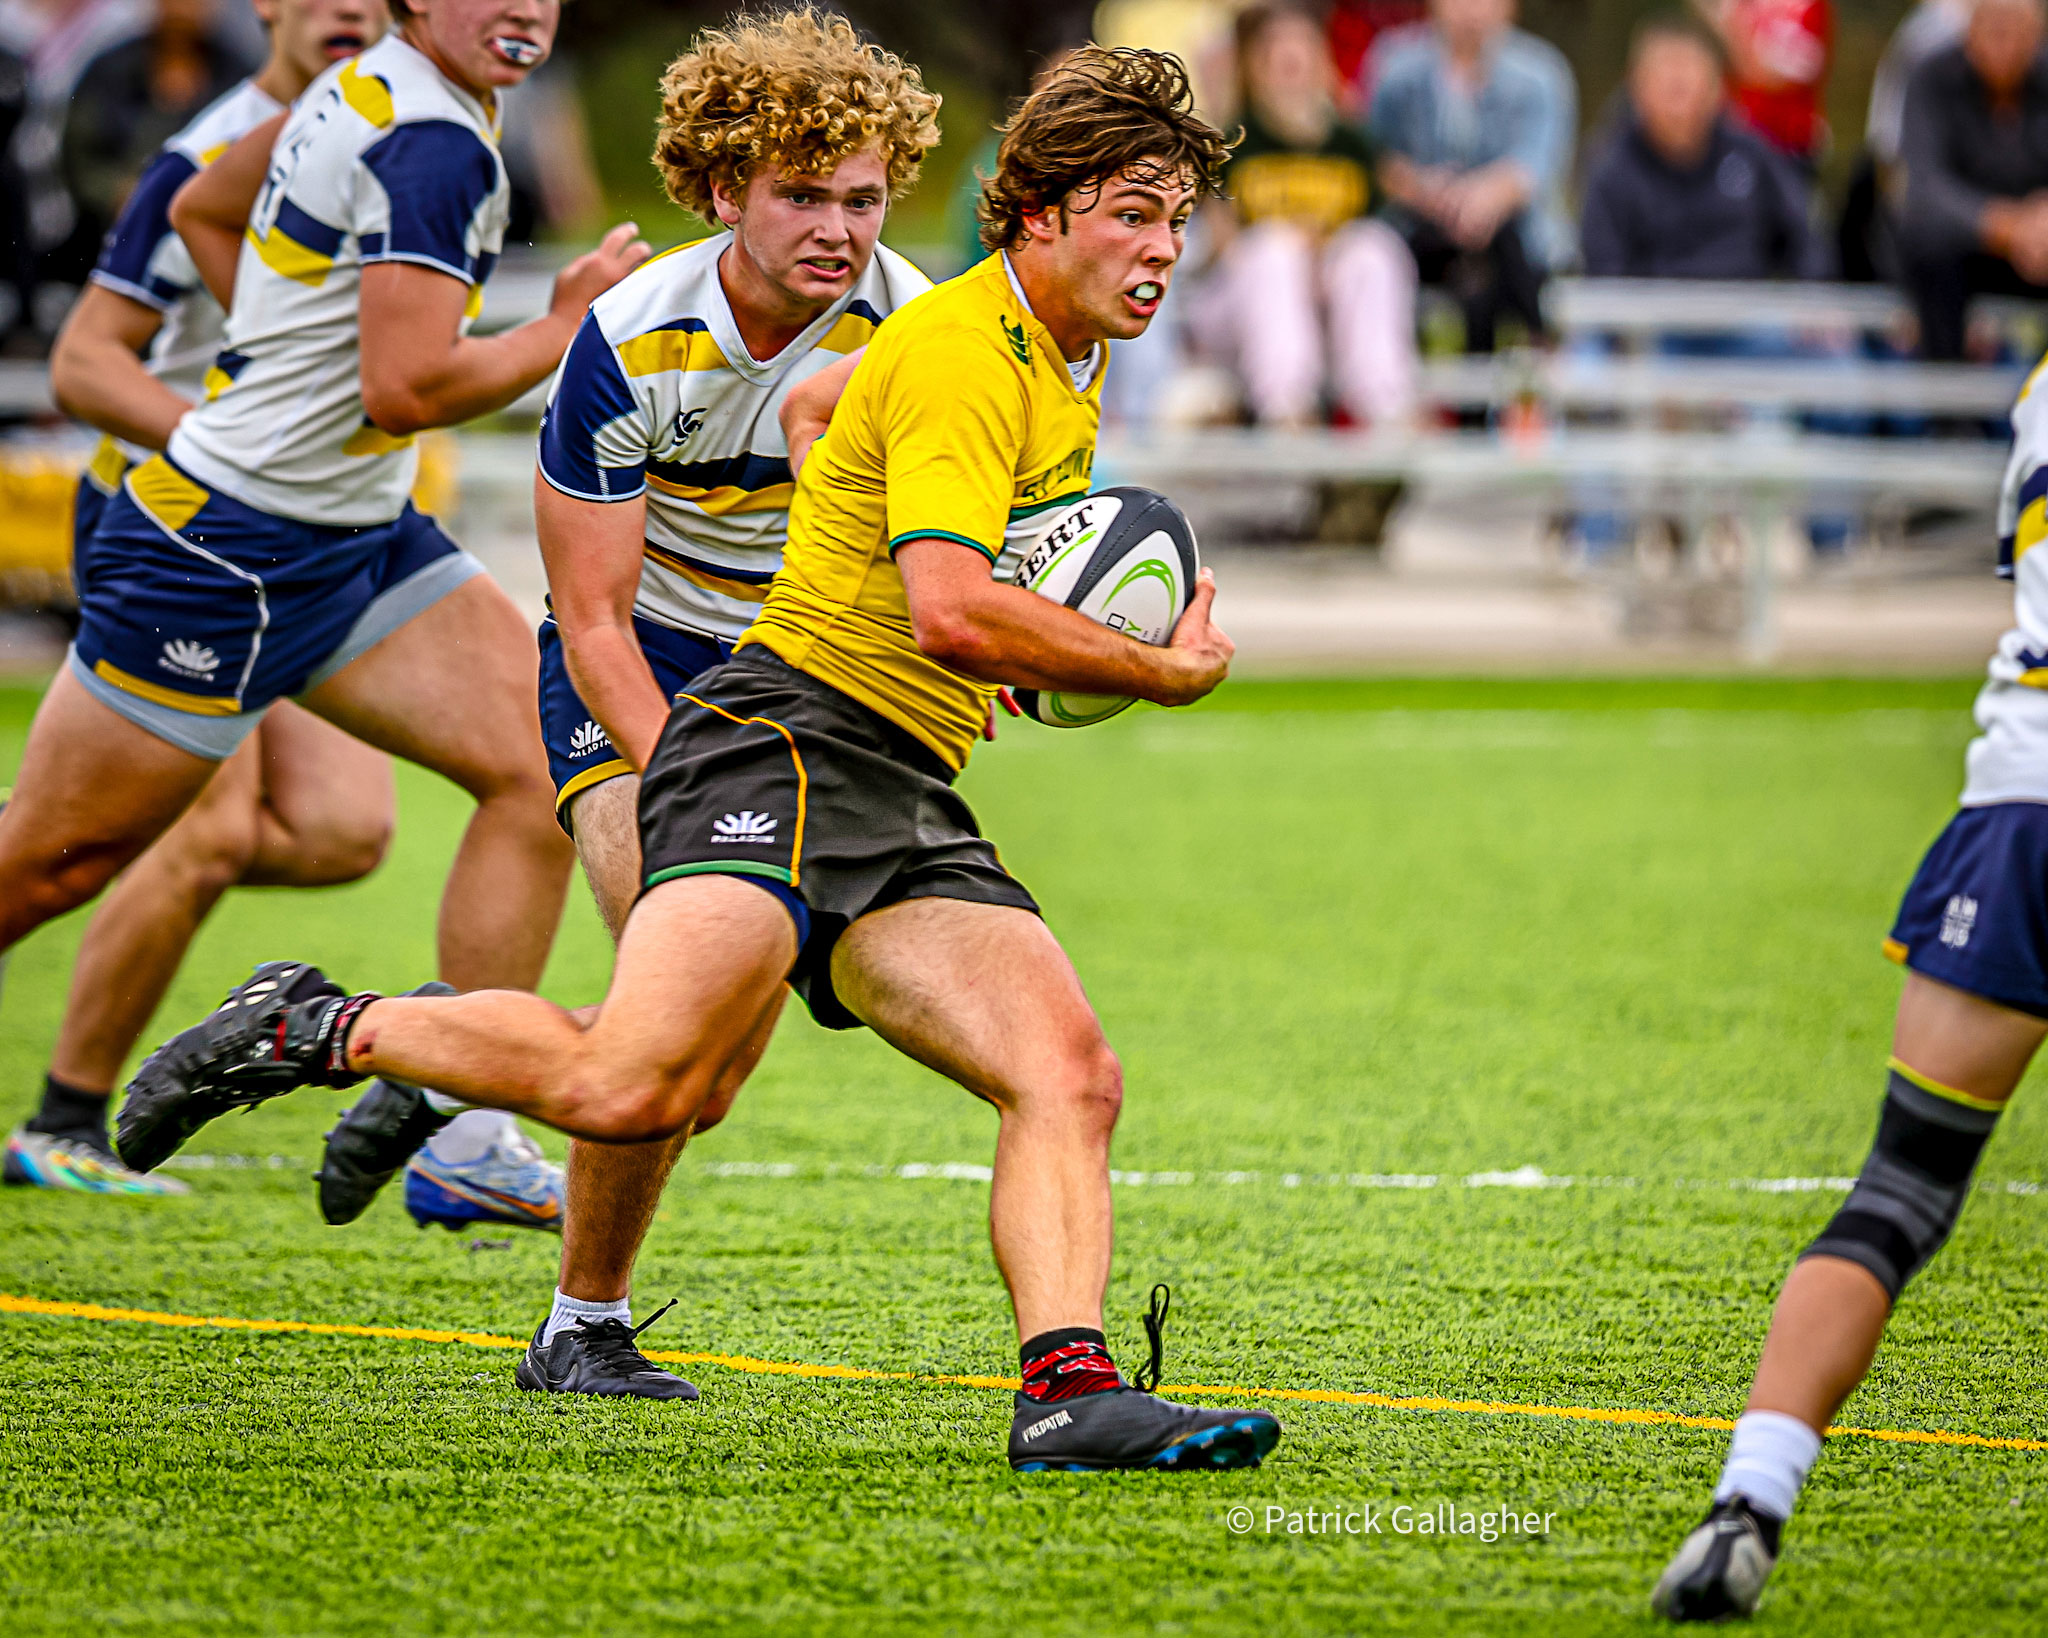 varsity gold rugby player escaping defenders during a match in 2023